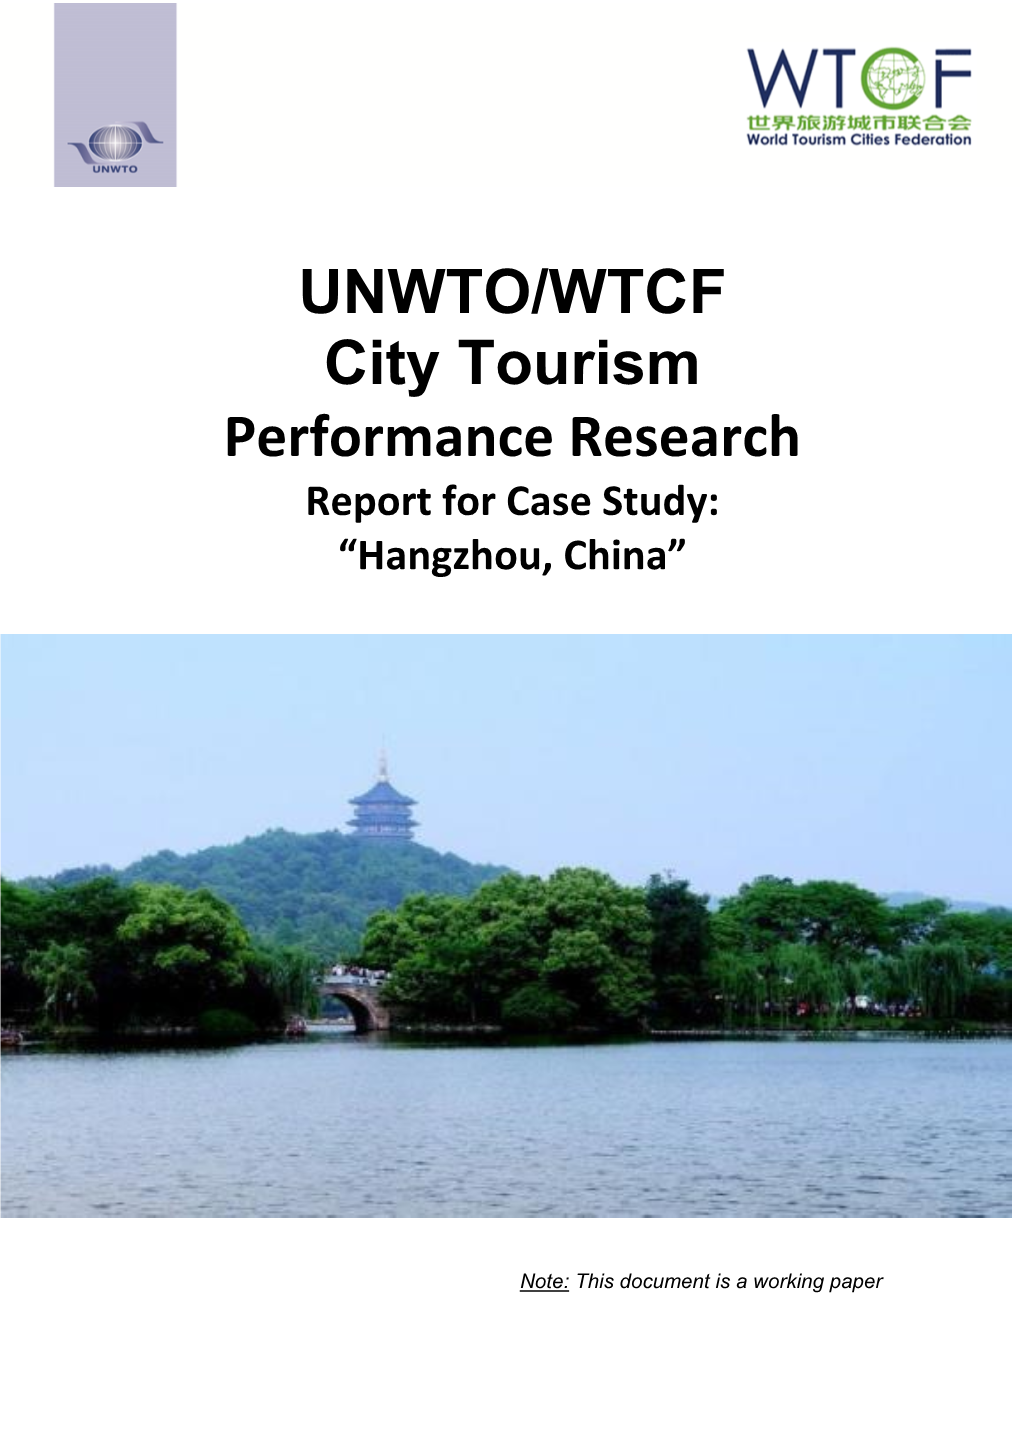 UNWTO/WTCF City Tourism Performance Research Report for Case Study: “Hangzhou, China”